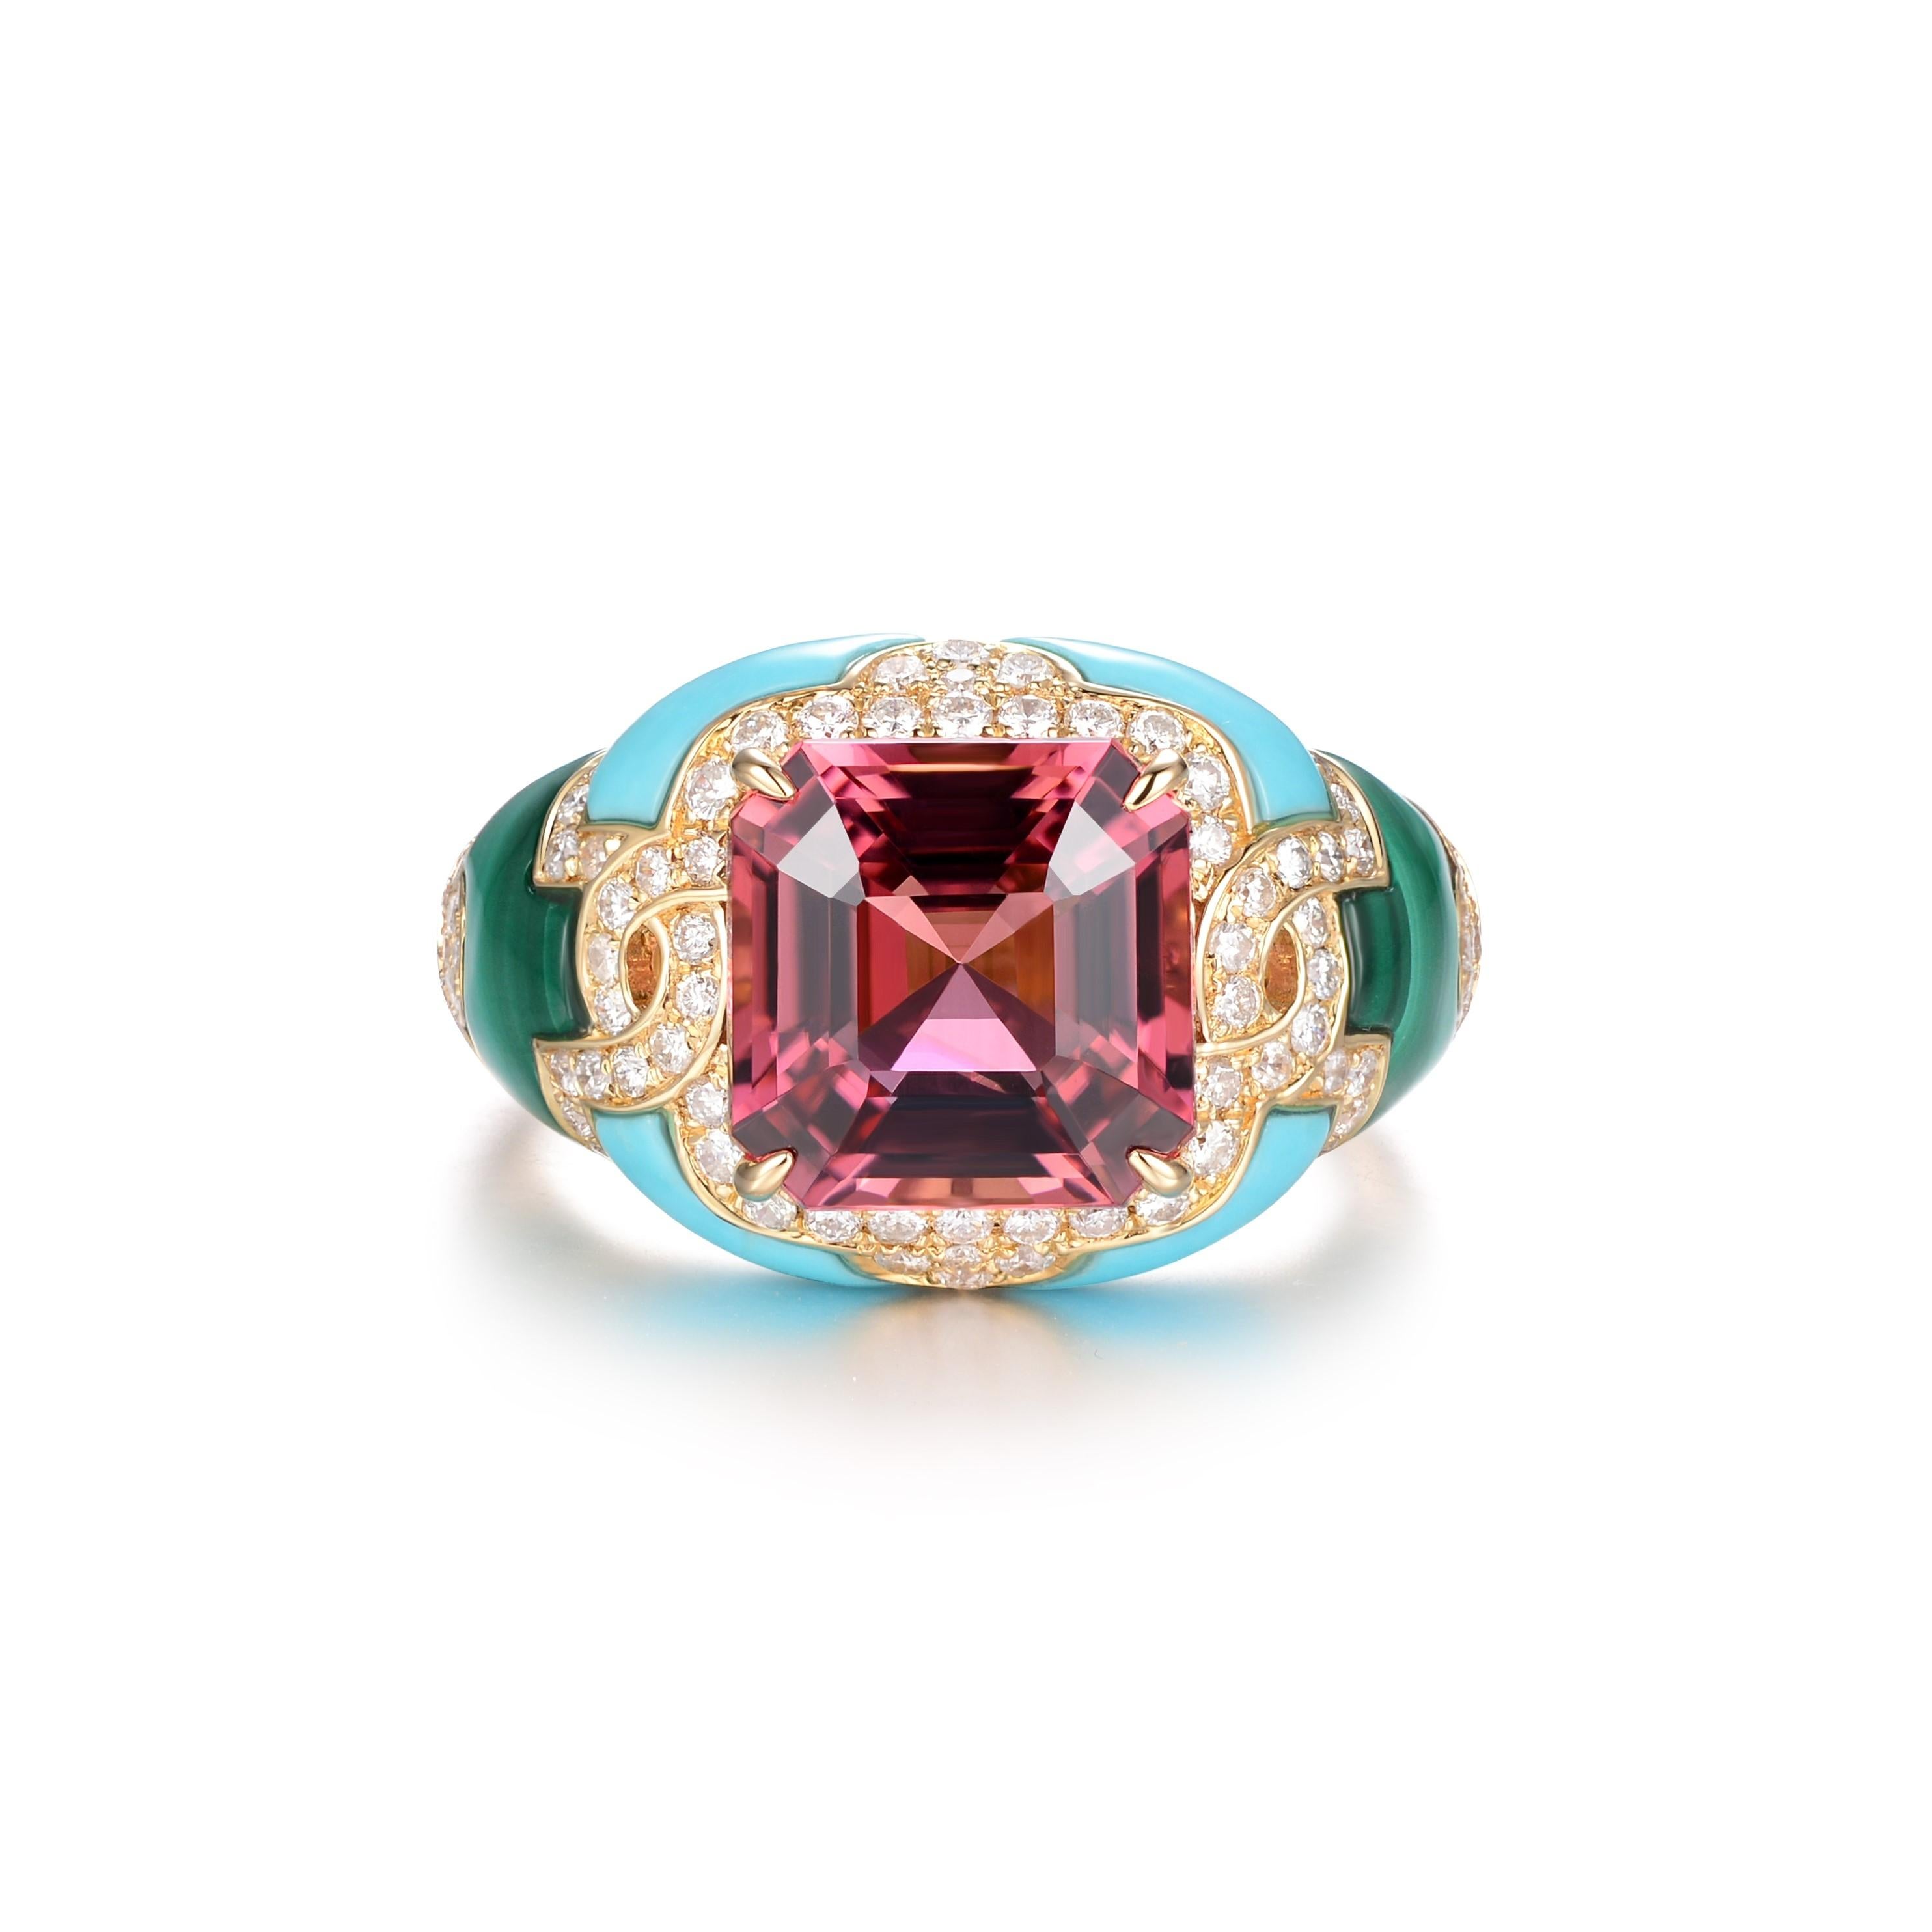 Introducing our stunning 18 karat yellow gold tourmaline cocktail ring, featuring a gorgeous 4.21 carat square cut tourmaline with a strong pink hue, surrounded by a handcrafted arrangement of turquoise and malachite stones. The intricate design is